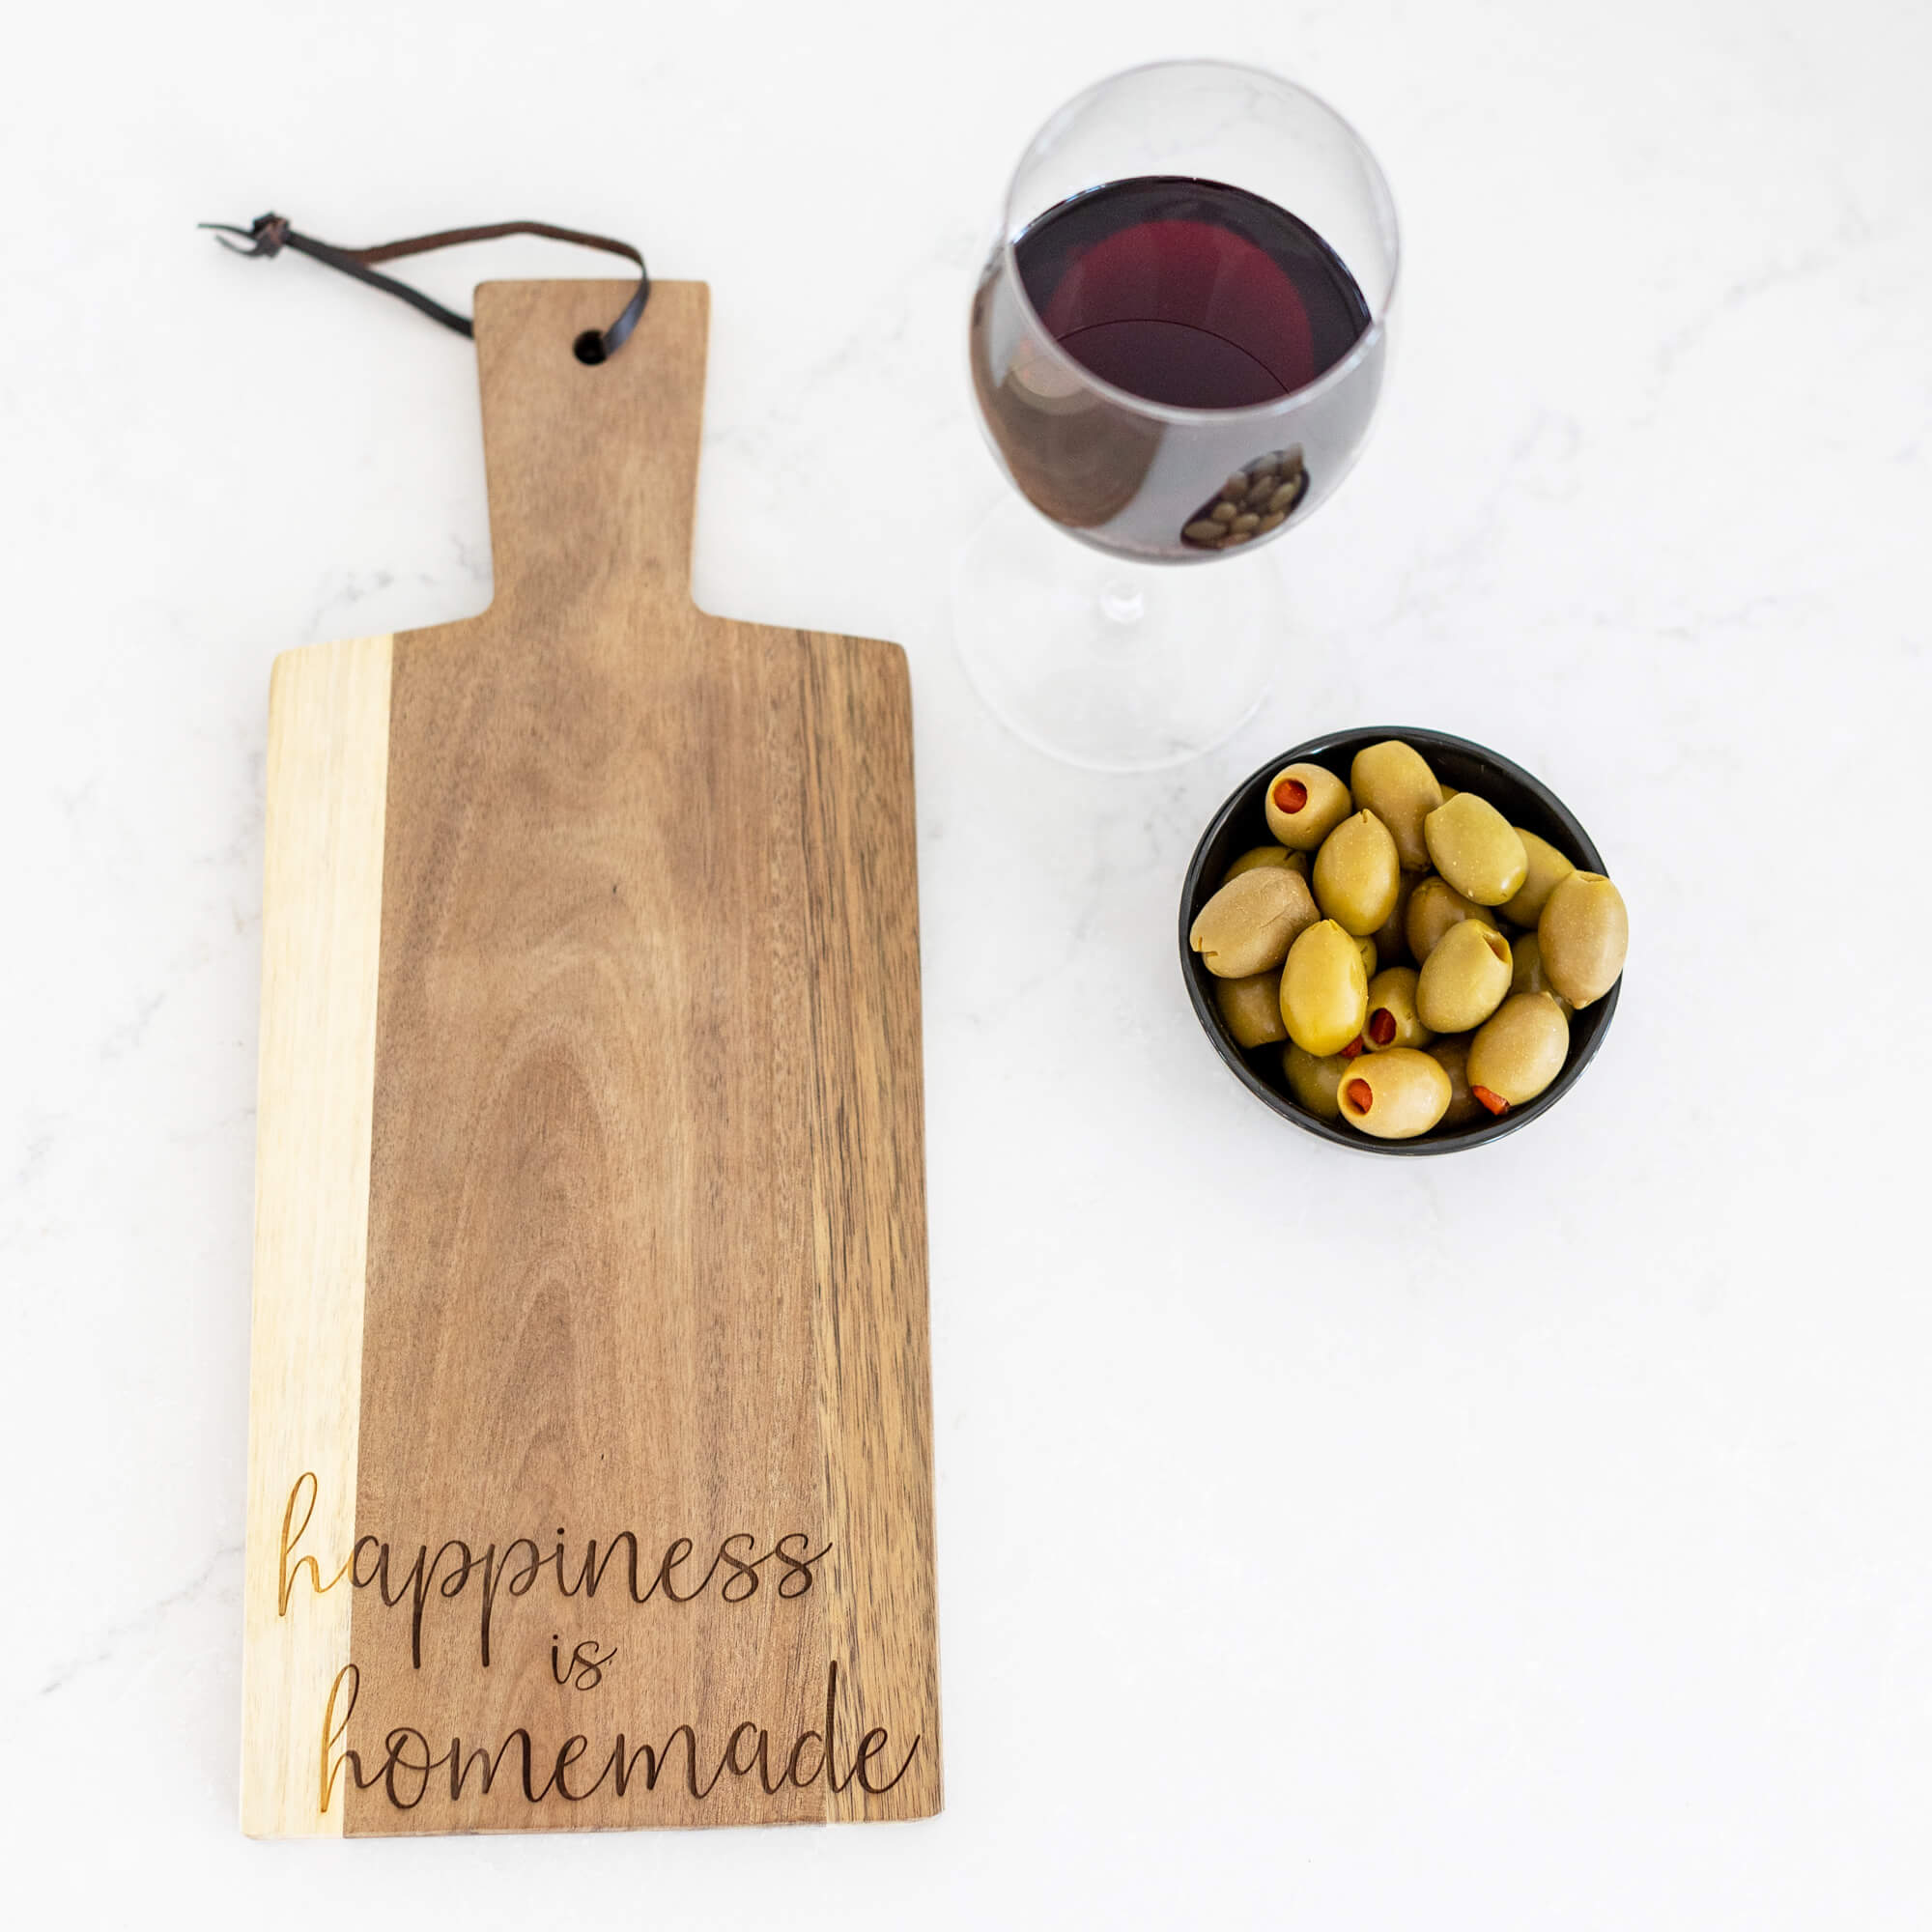 6.25 x 15 Acacia Wood Serving Board - Happiness is Homemade